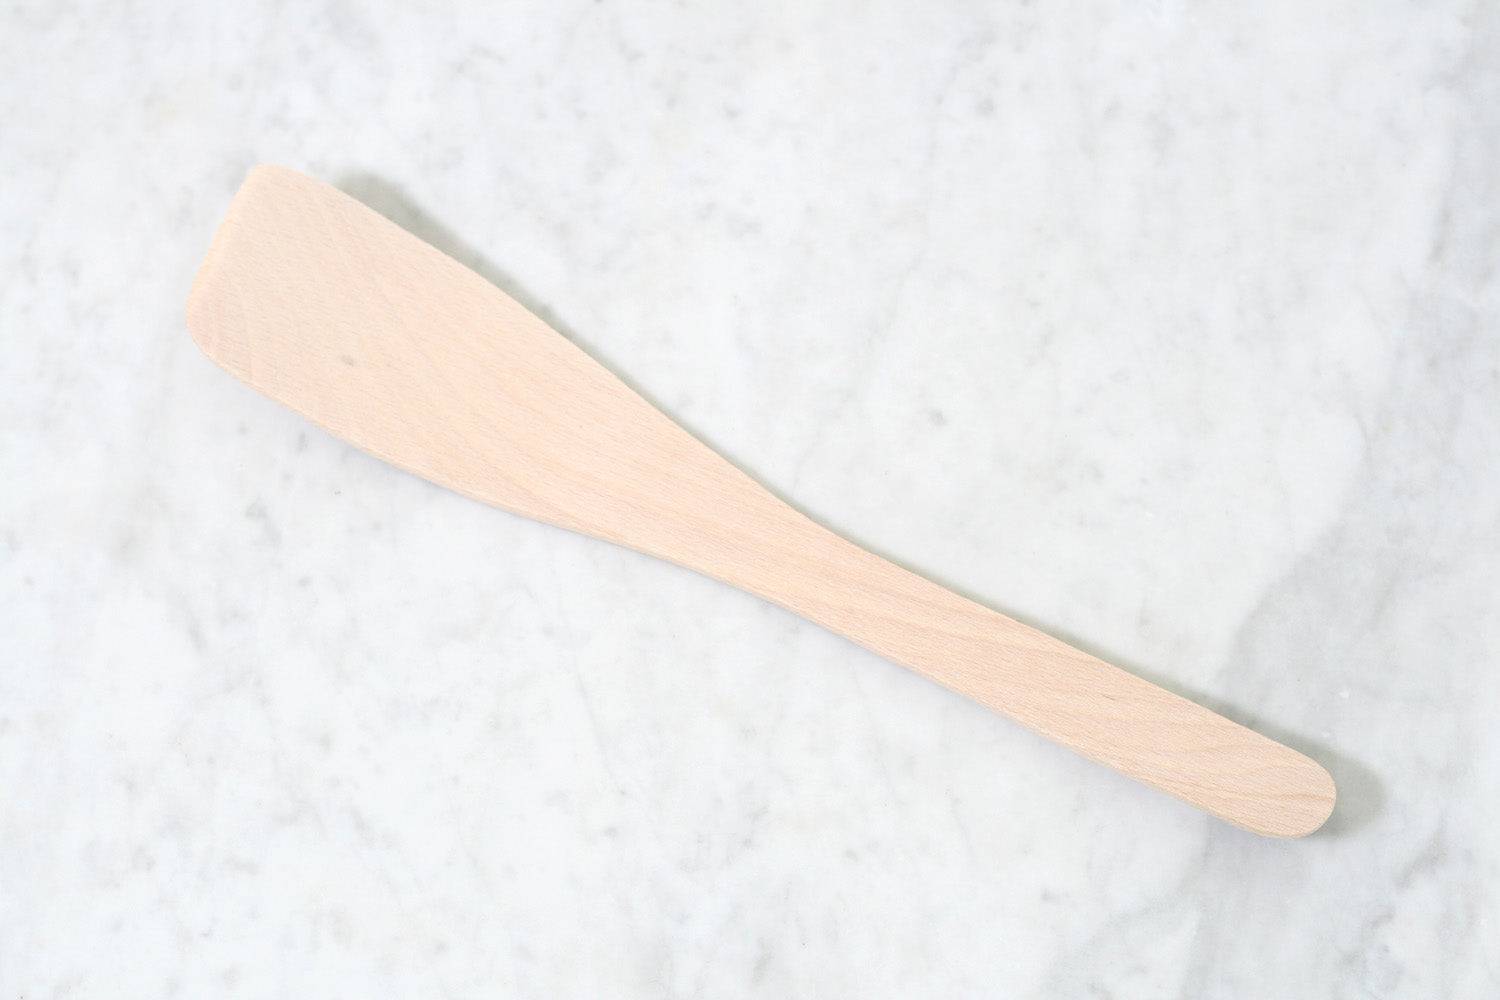 Hand carved French wood spatulas and spoons made from beech wood